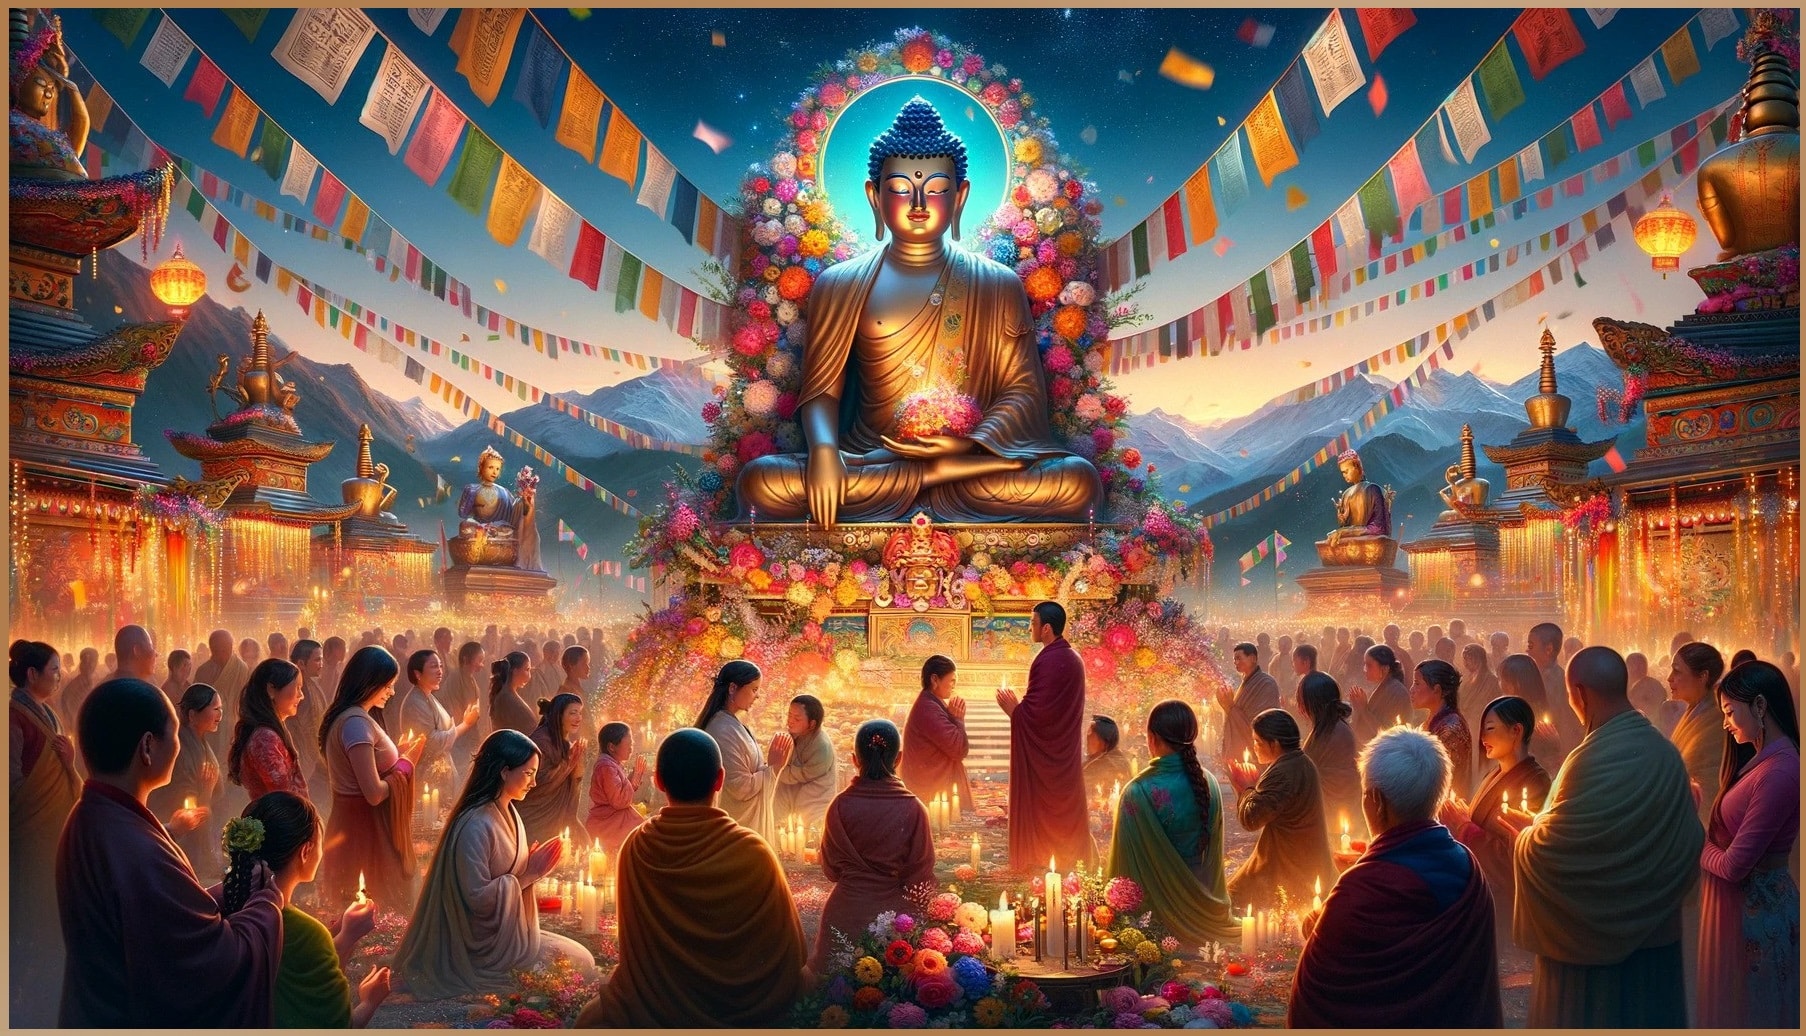 Diverse group of people celebrating Ten Million Day around a decorated Buddha statue with prayer flags and candles